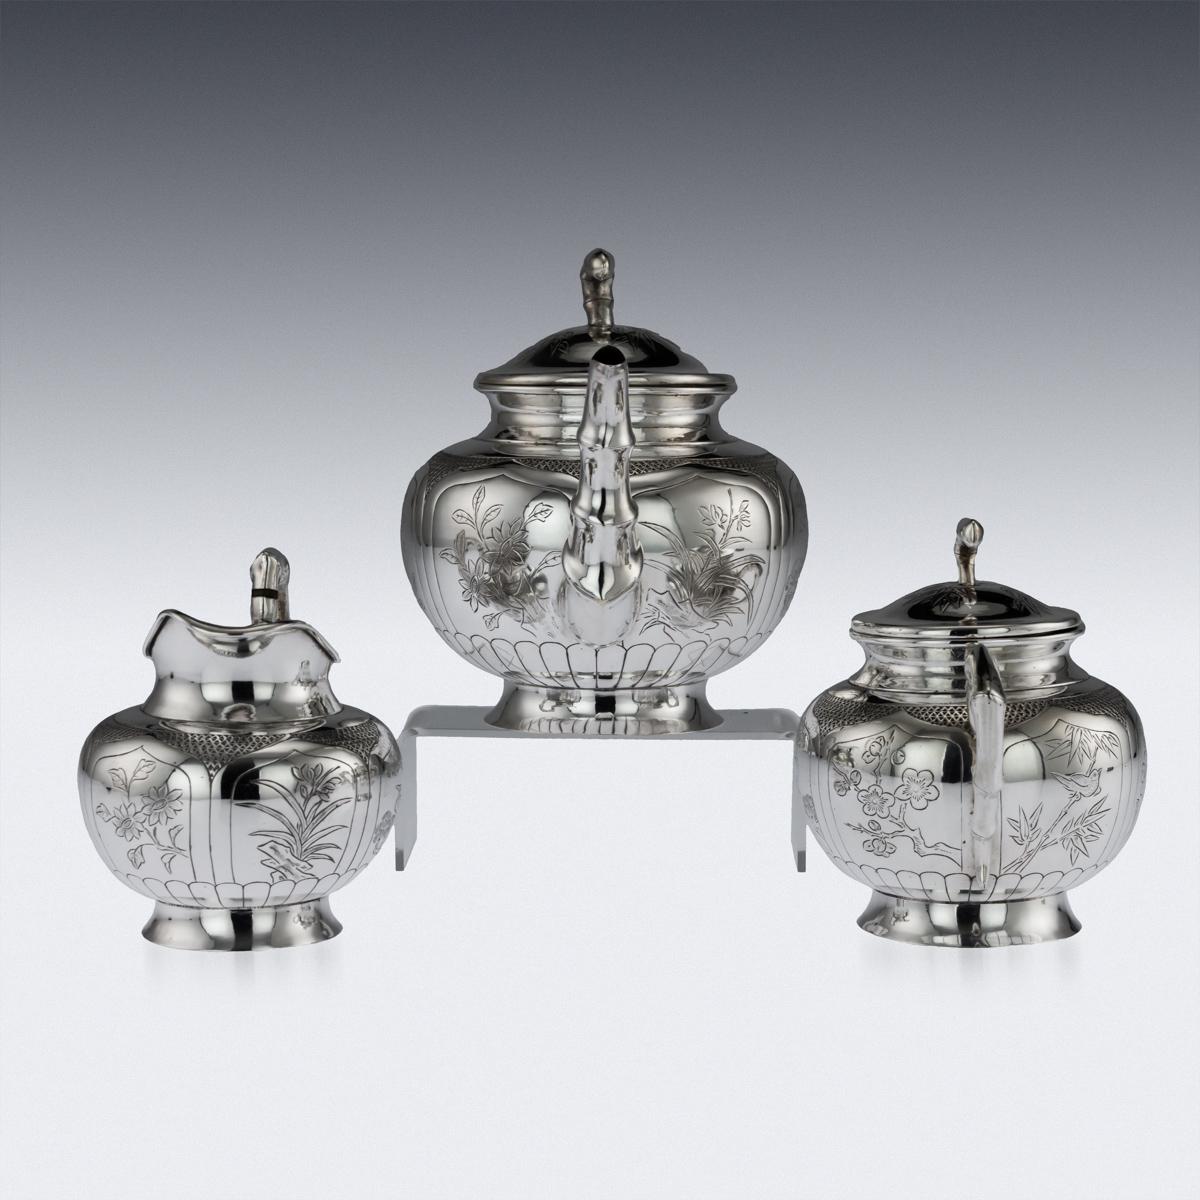 Antique 20thC Chinese Solid Silver 3 Piece Tea Set On Tray c.1910 In Good Condition For Sale In Royal Tunbridge Wells, Kent